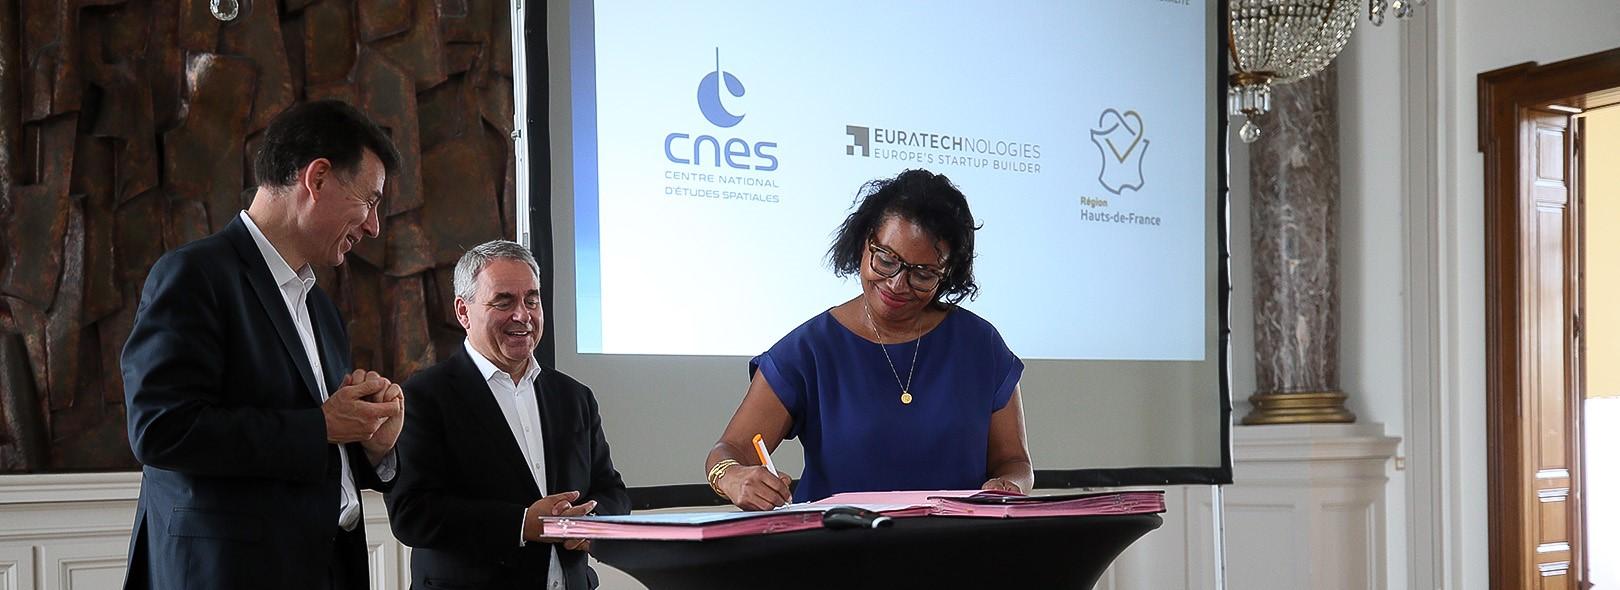 CNES, EuraTechnologies and the Hauts-de-France Region, partners in developing space innovation for the region's economic development